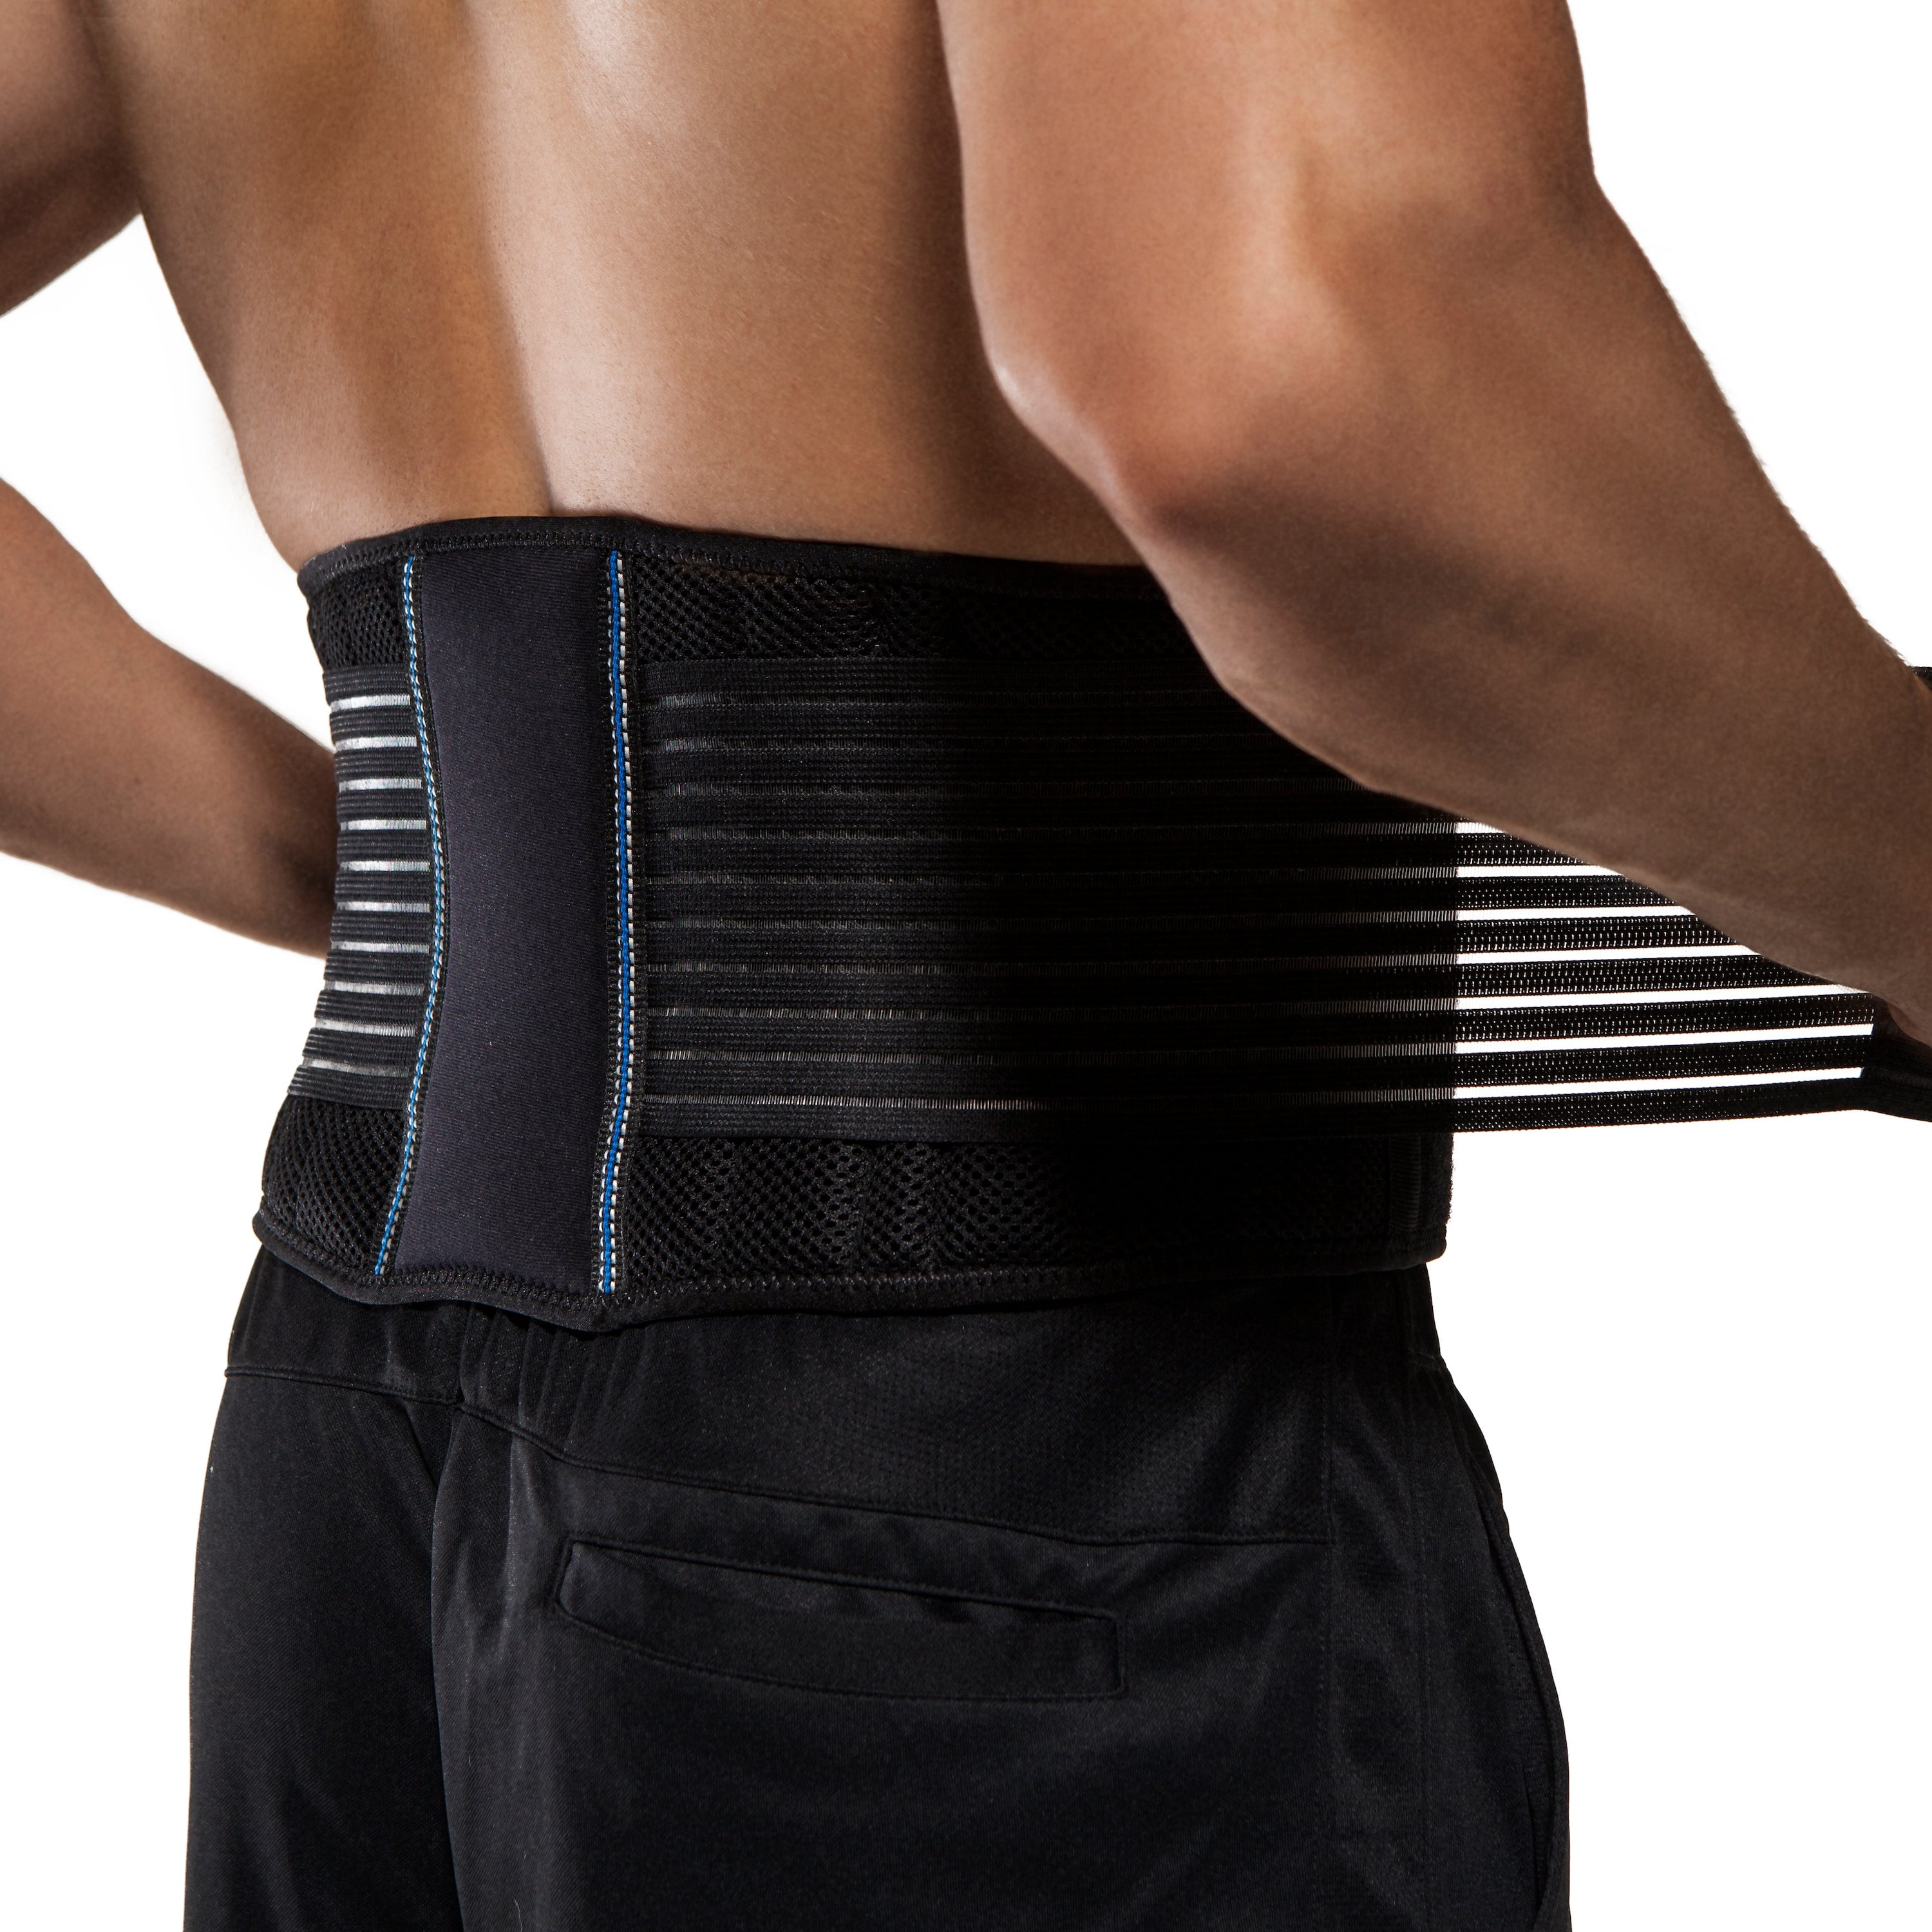 AllyFlex Sports Back Brace for Lifting Lower Back Support for Work Y-Shape Suspenders Safety Belt with Dual 3D Lumbar Support Relieve Pain, Prevent